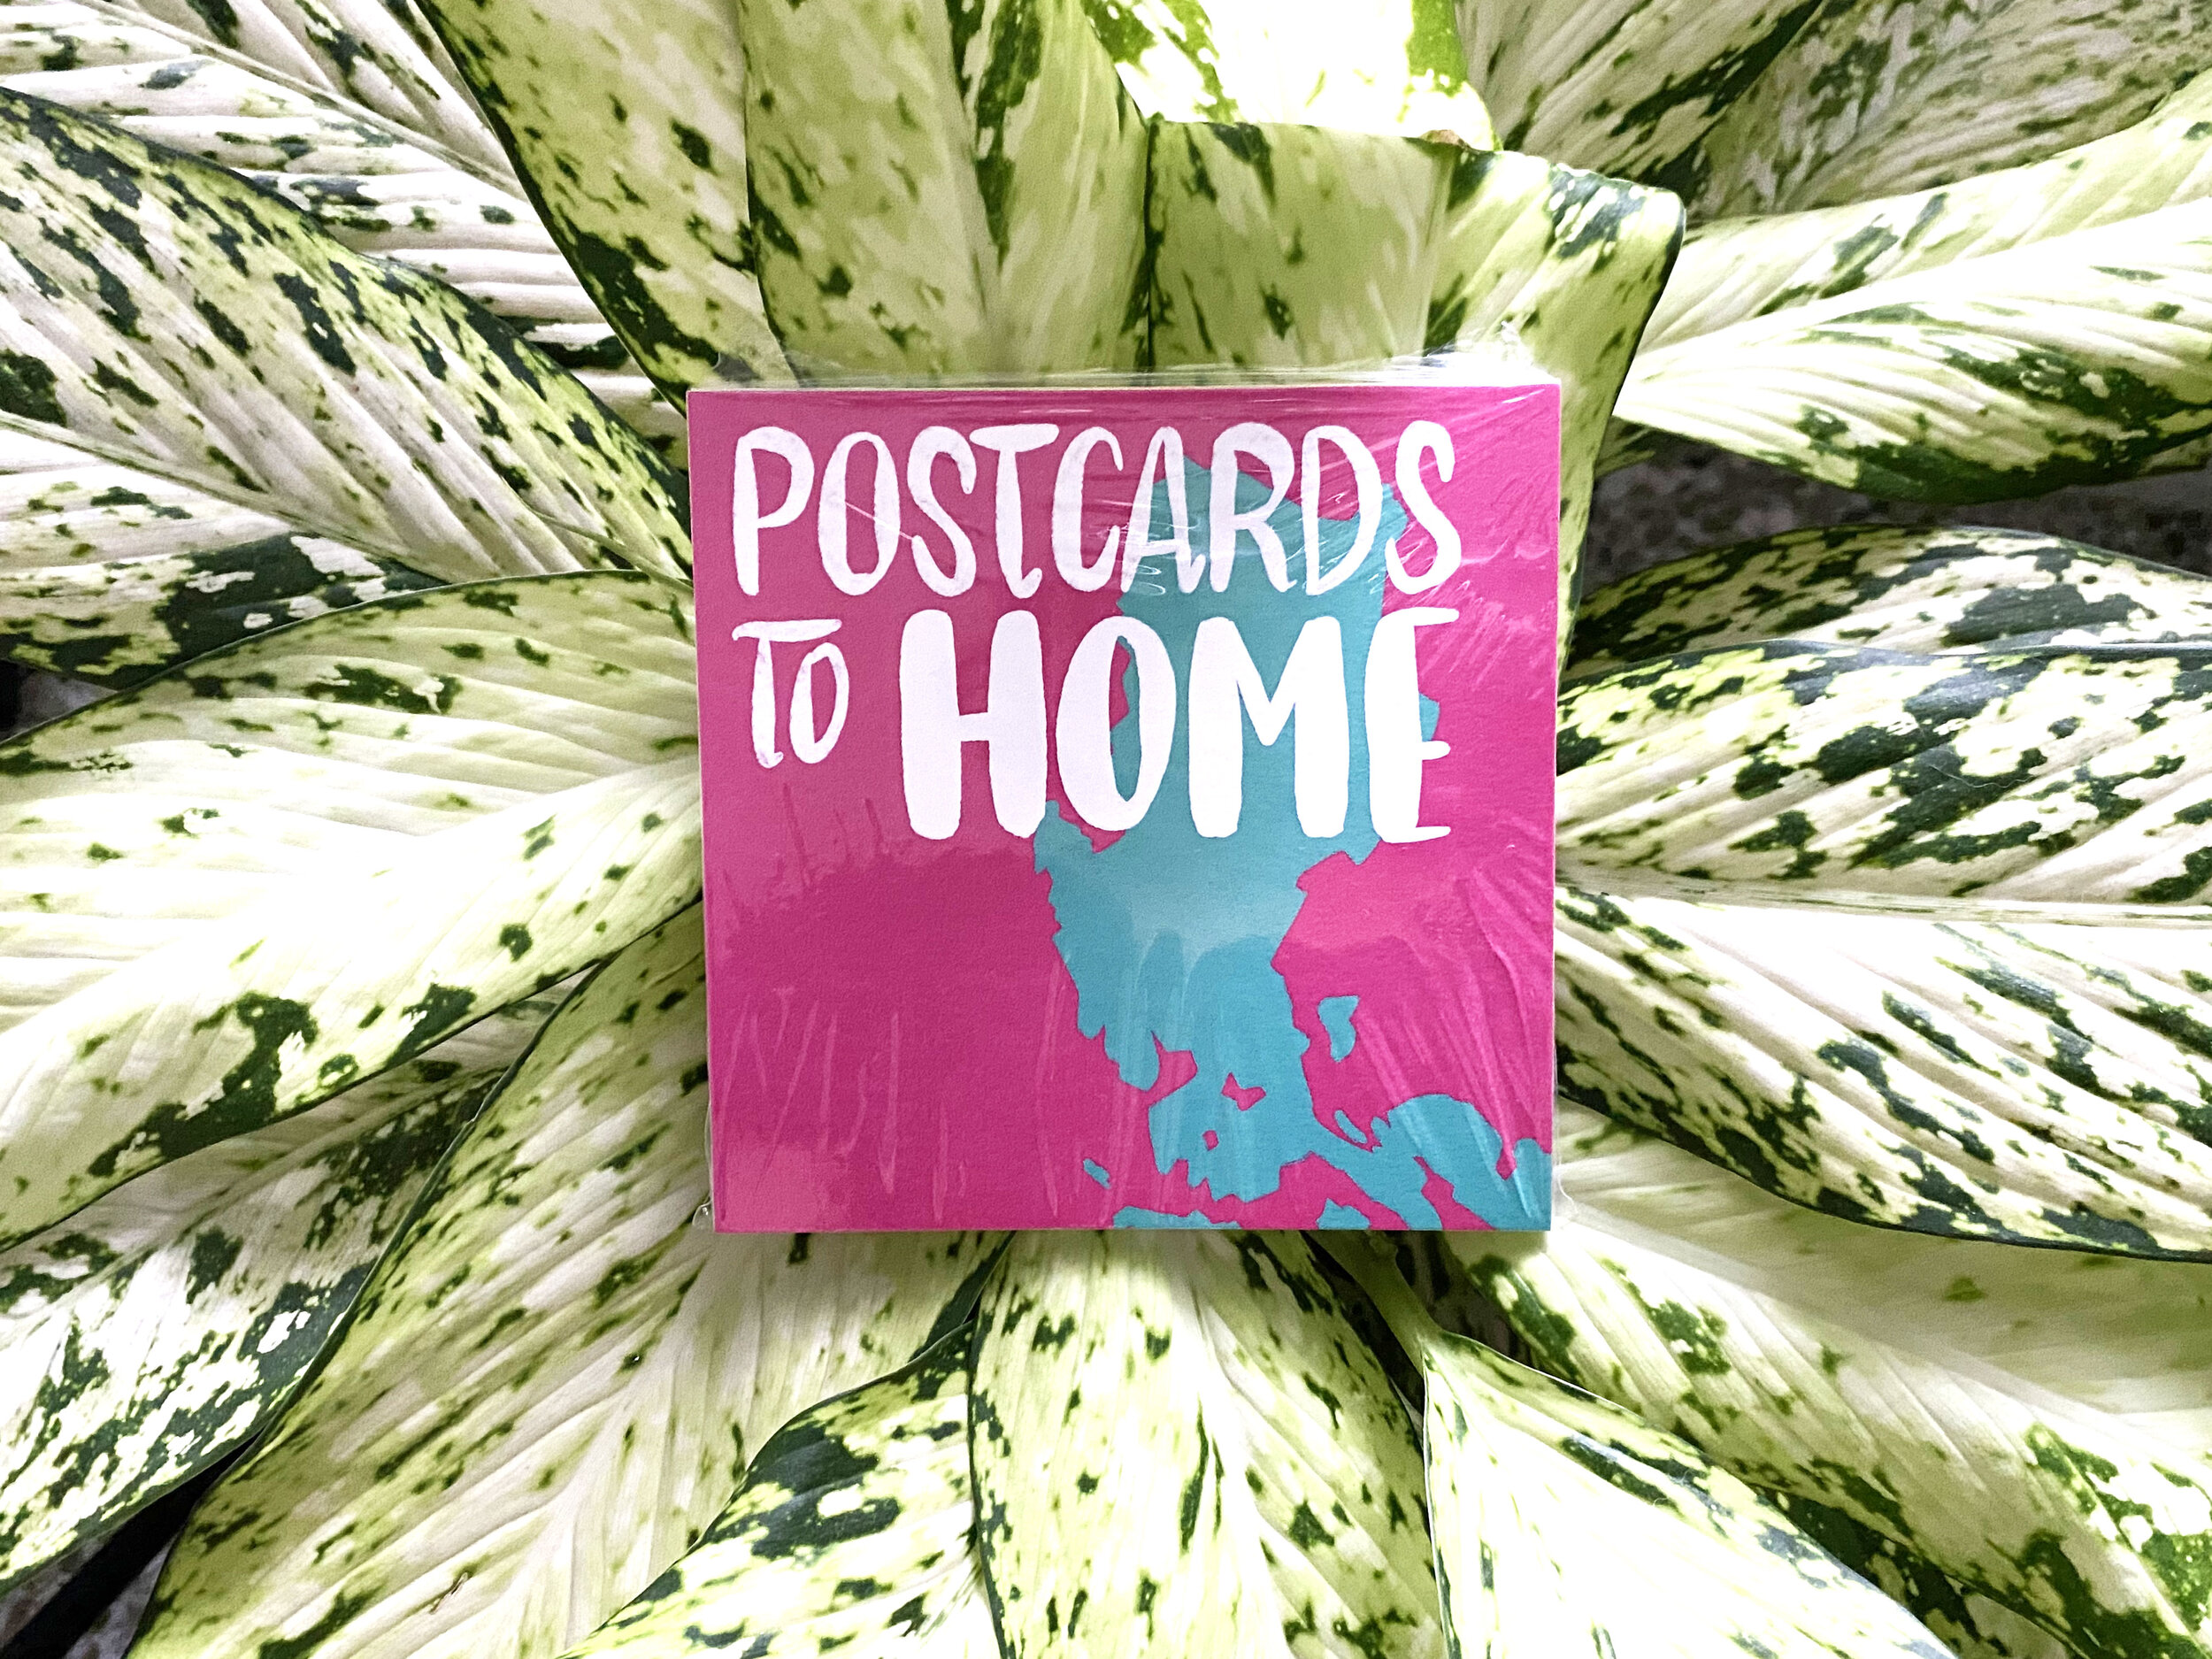 Postcards-to-Home-Green.jpg